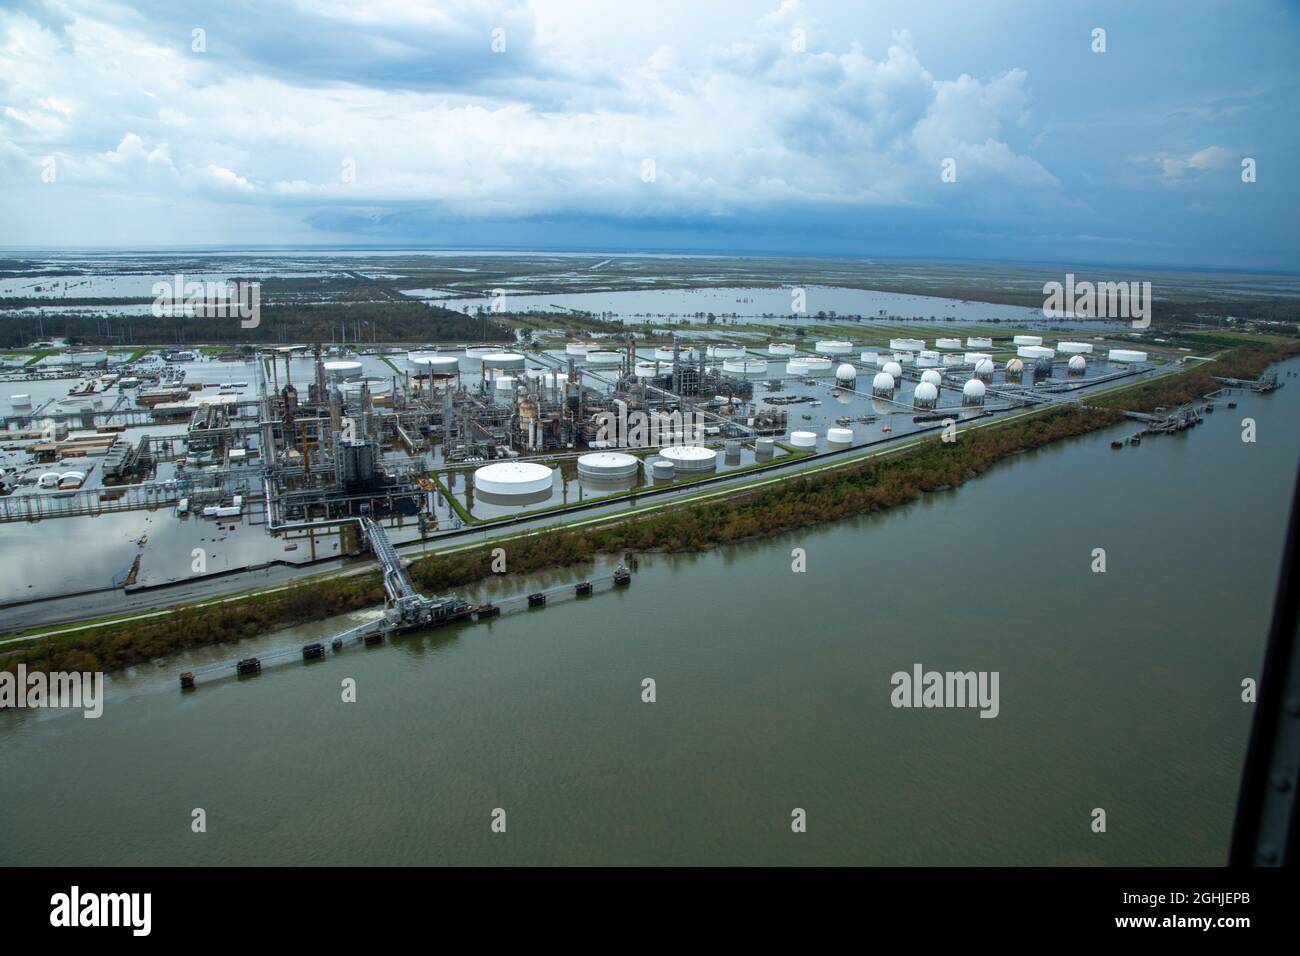 Belle Chasse, United States of America. 01 September, 2021. Aerial view of a flooded oil refinery caused by Category 4 Hurricane Ida along the west bank of the Mississippi River at Plaquemines Parish September 3, 2021 in Belle Chasse, Louisiana. Credit: Maj. Grace Geiger/U.S. Army/Alamy Live News Stock Photo